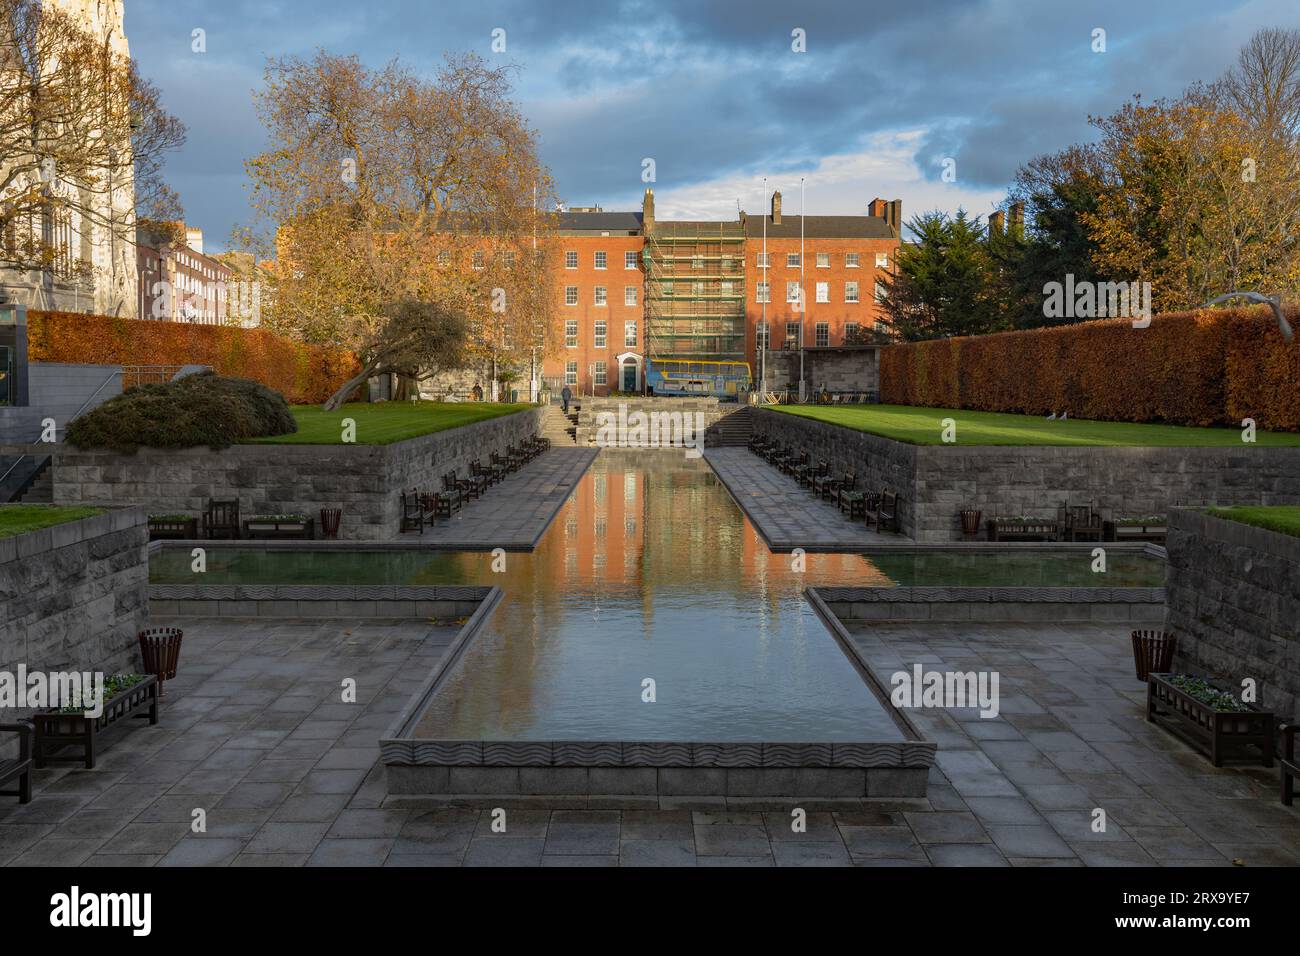 Garden of Remembrance, Irish heritage, Famouse place dedicated to the memory of all those who gave their lives in the cause of Irish Freedom, Dublin Stock Photo